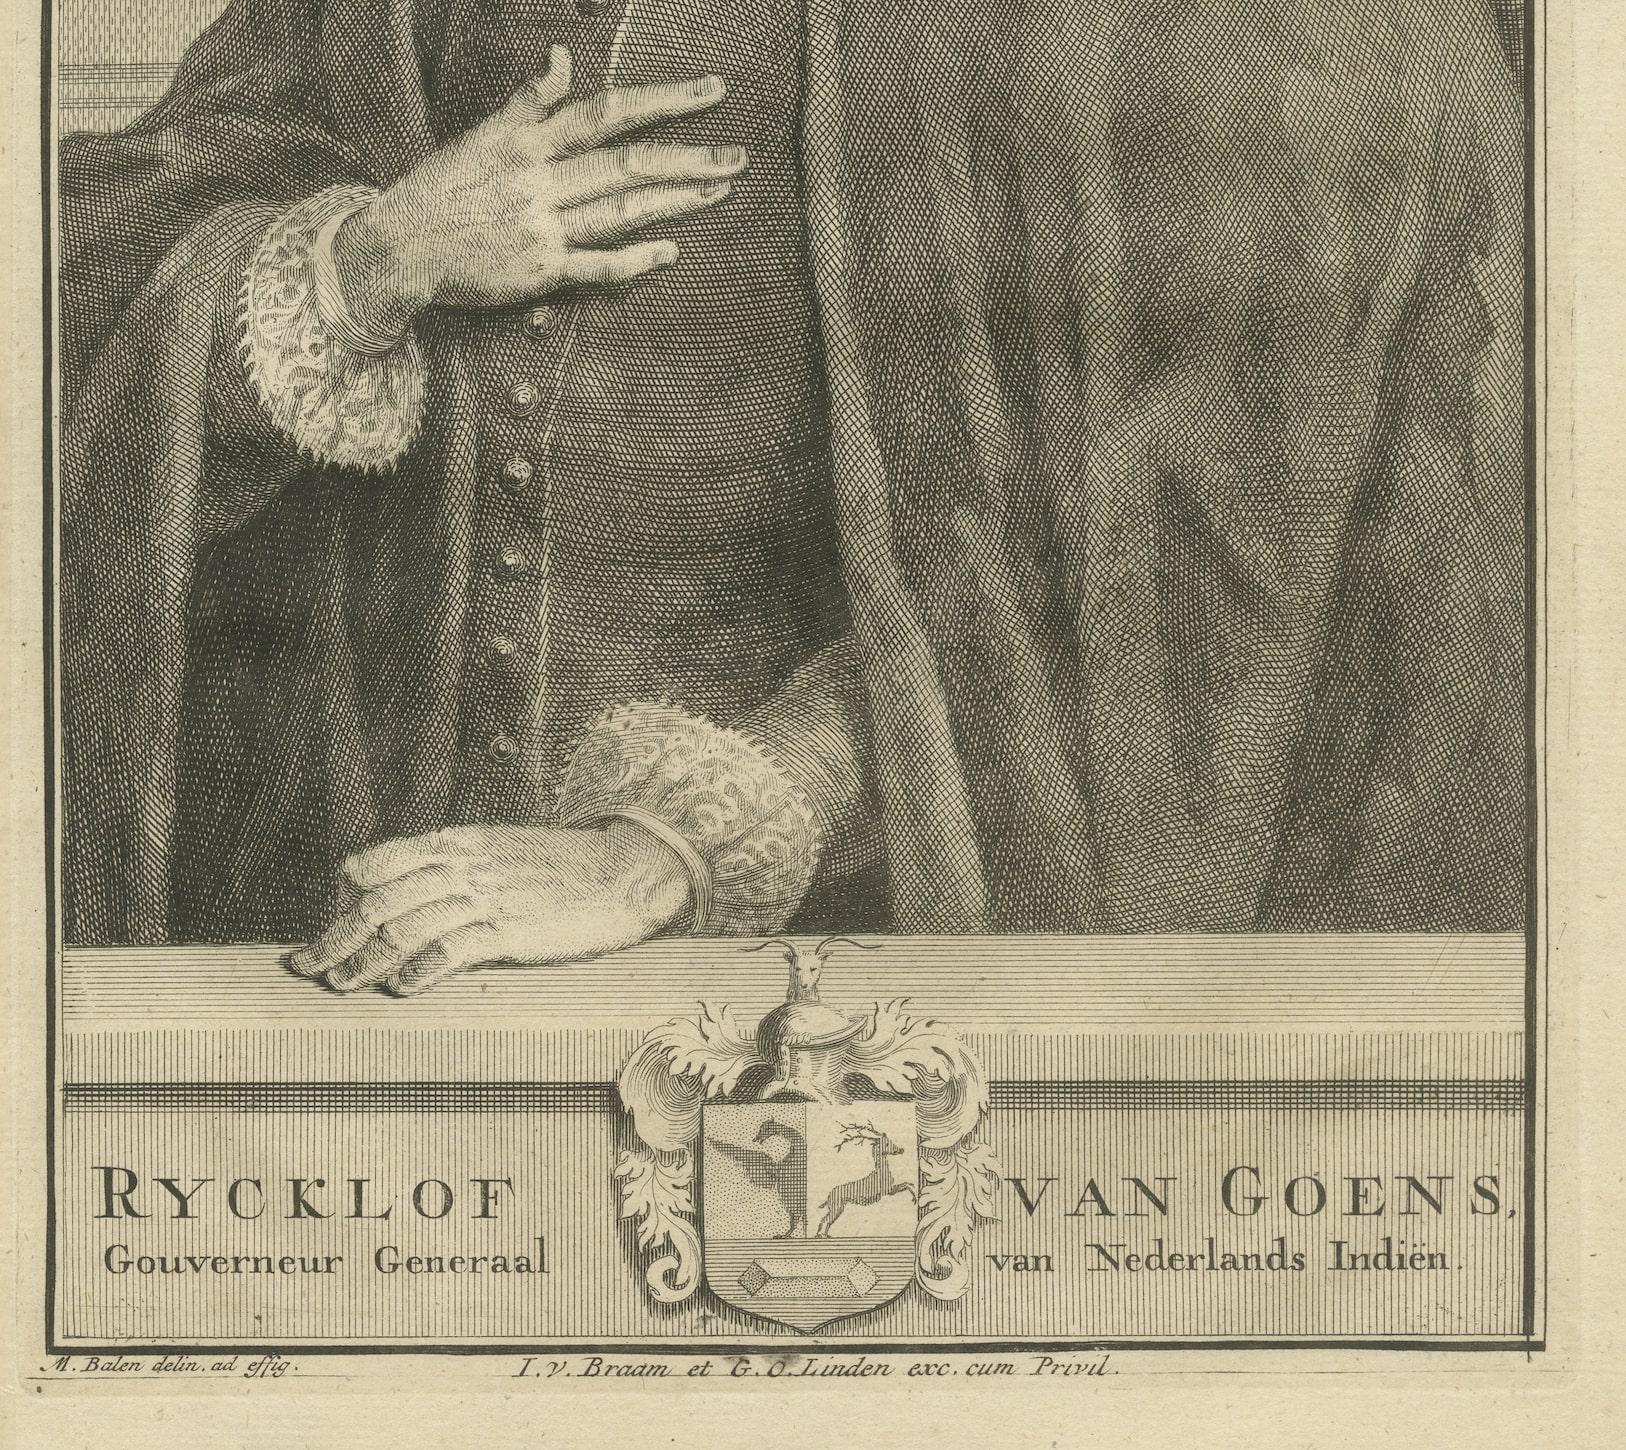 Engraved Rycklof van Goens: Formidable Governor-General of the VOC, Dutch East Indies For Sale